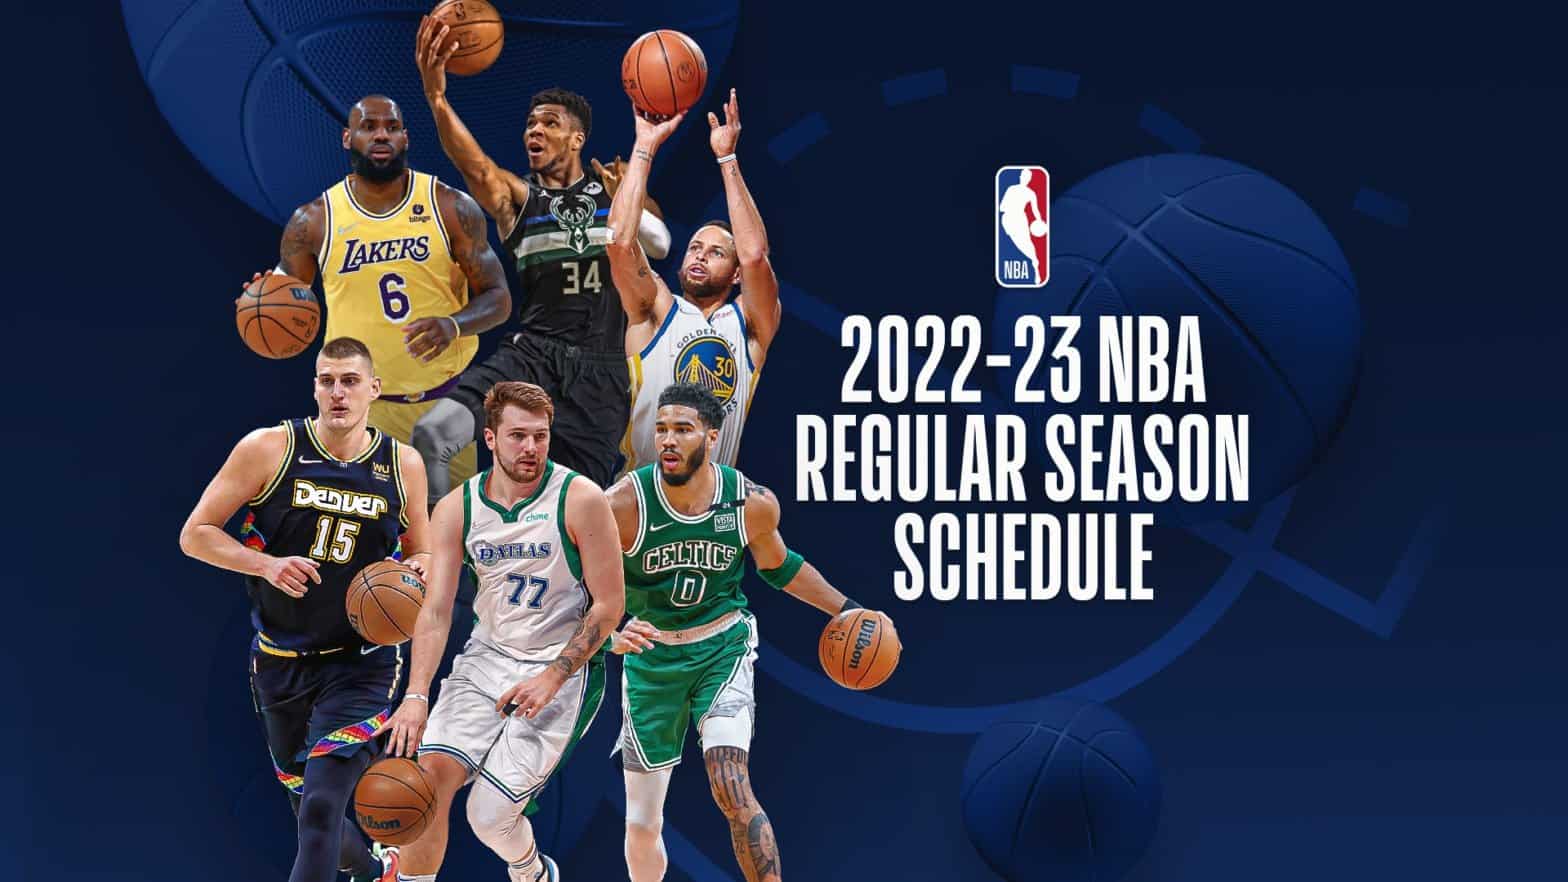 Lakers schedule 2022-23: Full list of games for this season